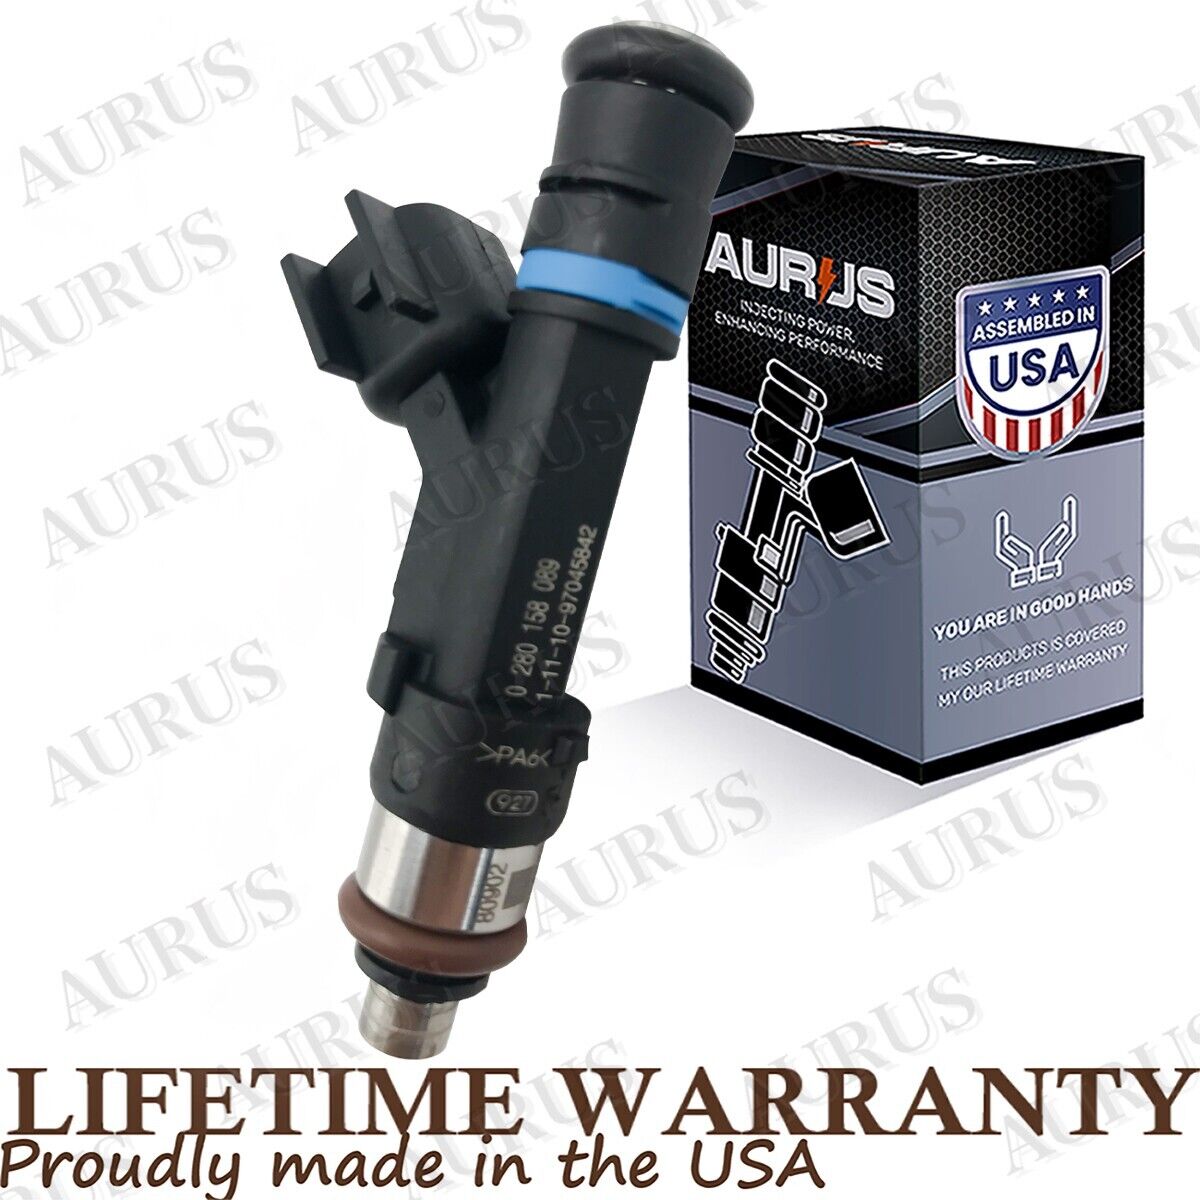 OEM AURUS NEW Fuel Injector for 06-11 Ford Victoria Lincoln Town Mercury 4.6L V8